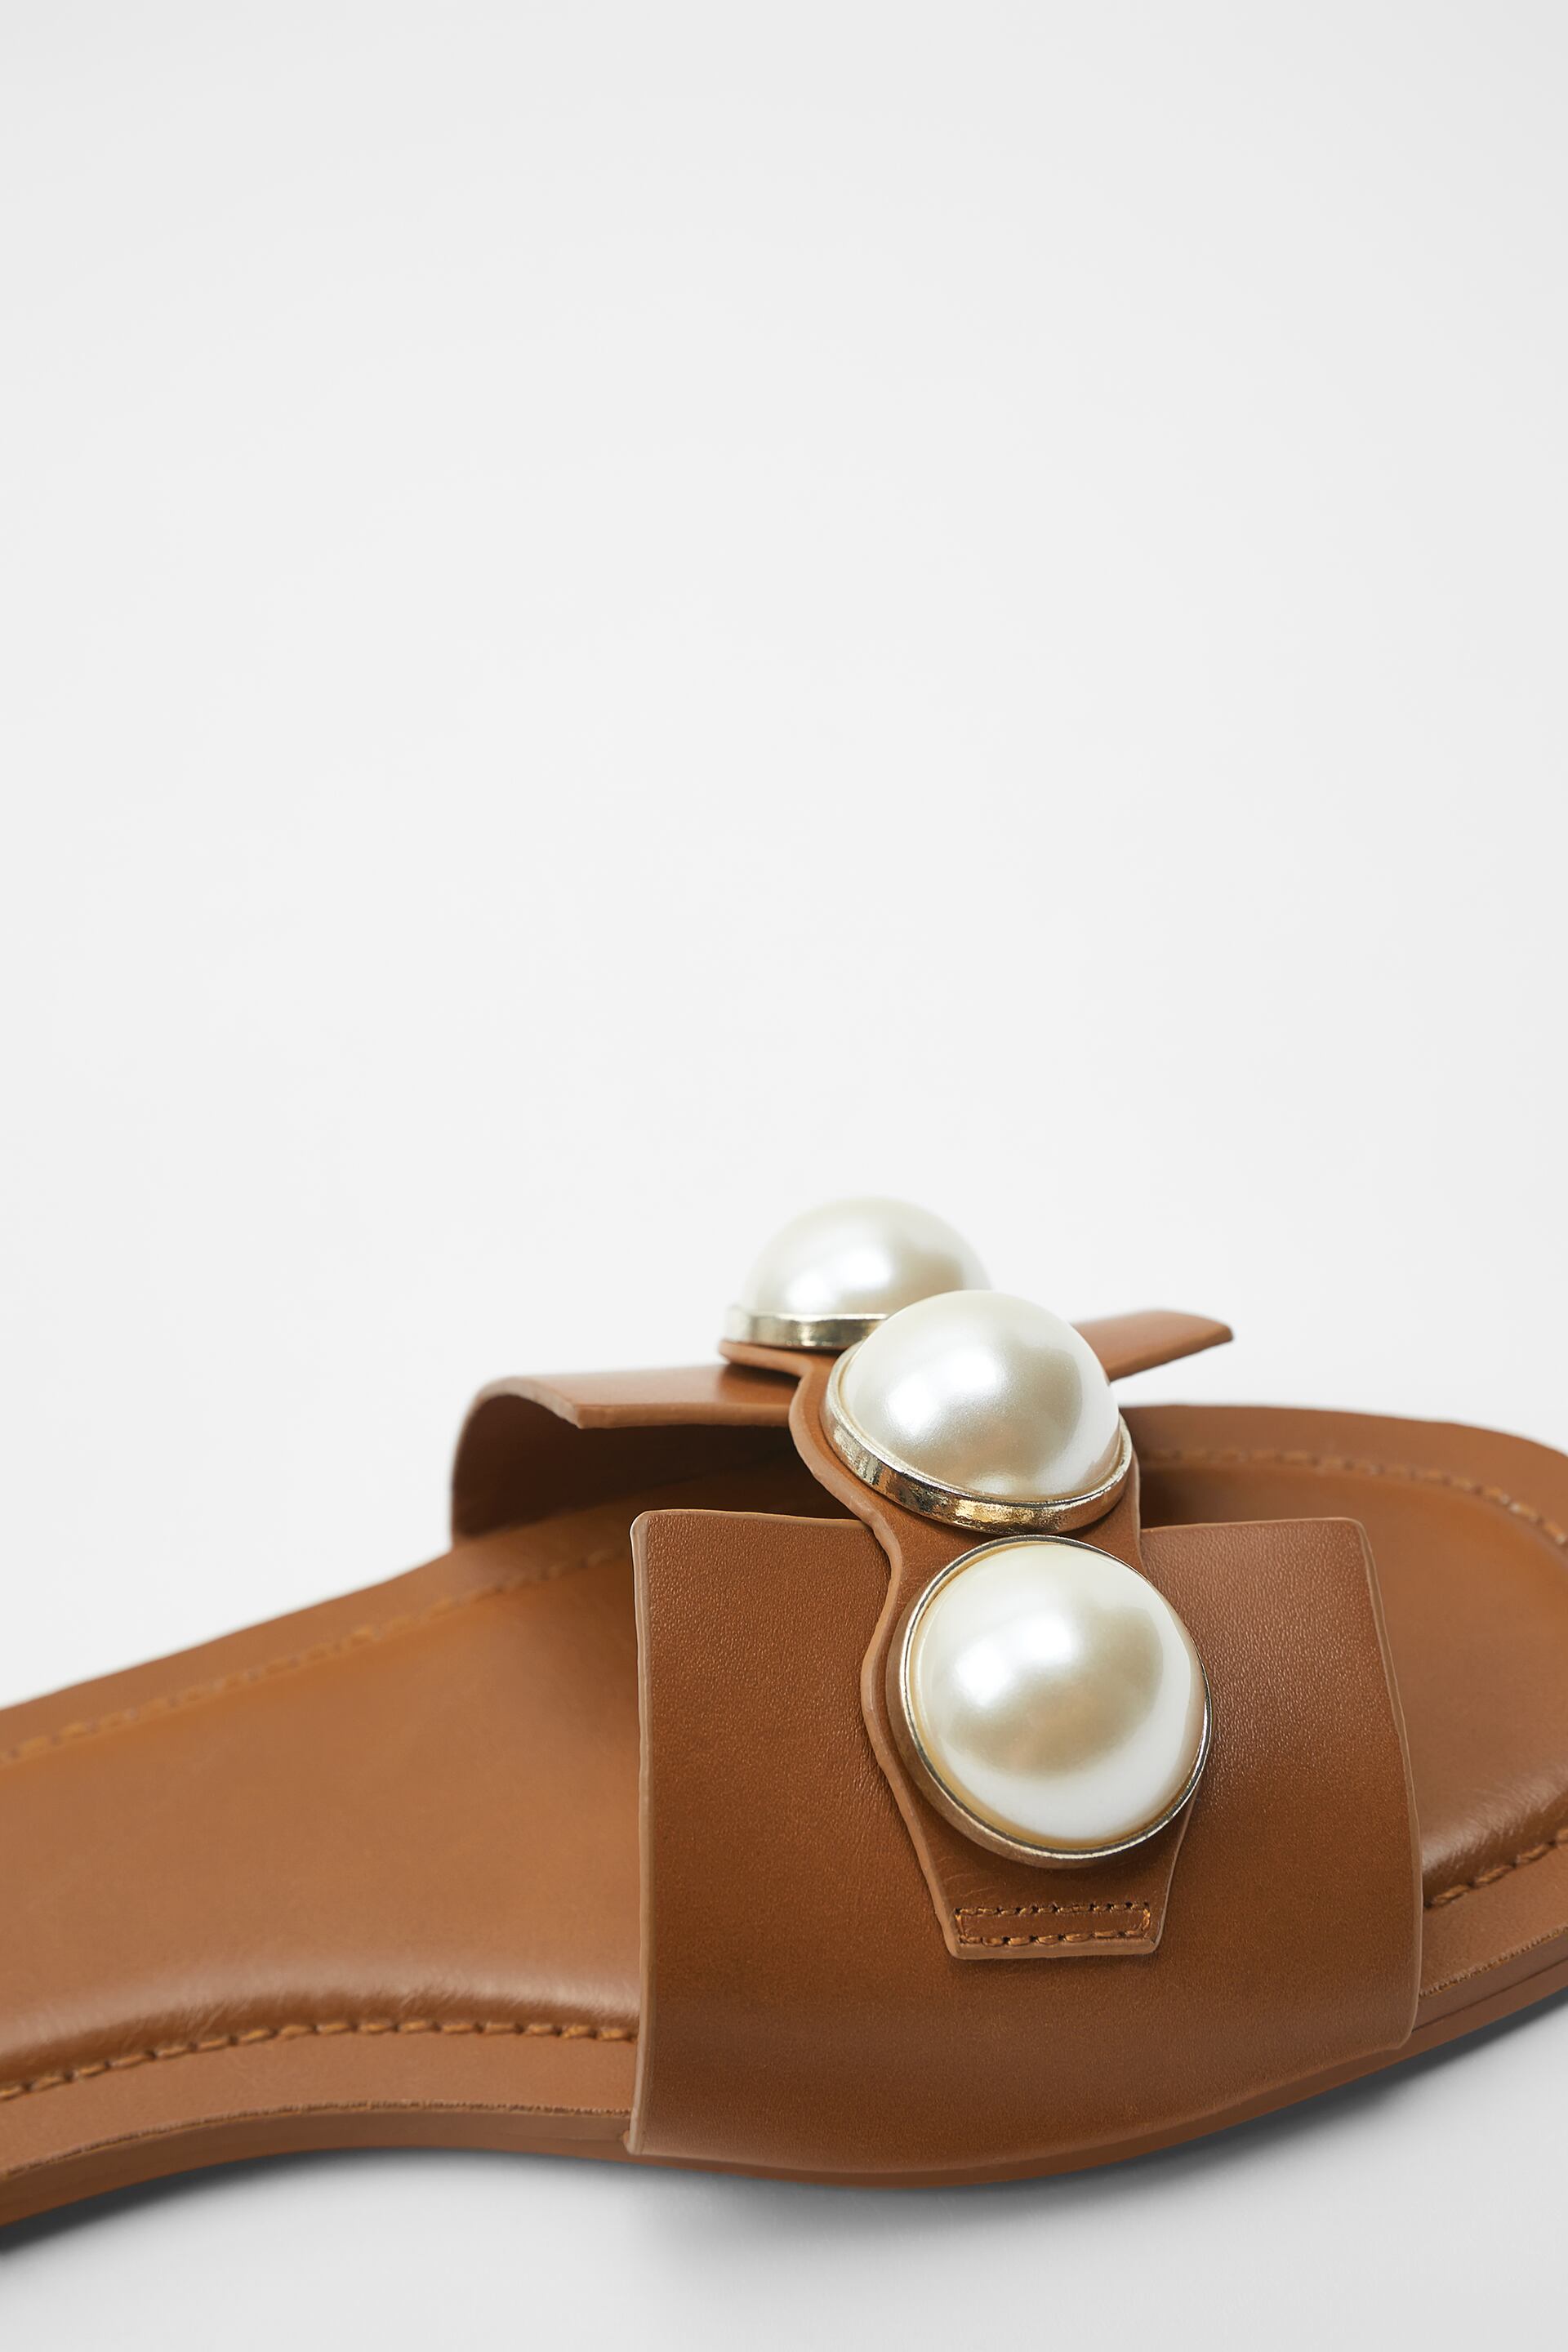 Zara FLAT LEATHER SANDALS WITH PEARLS - 58107654-105-